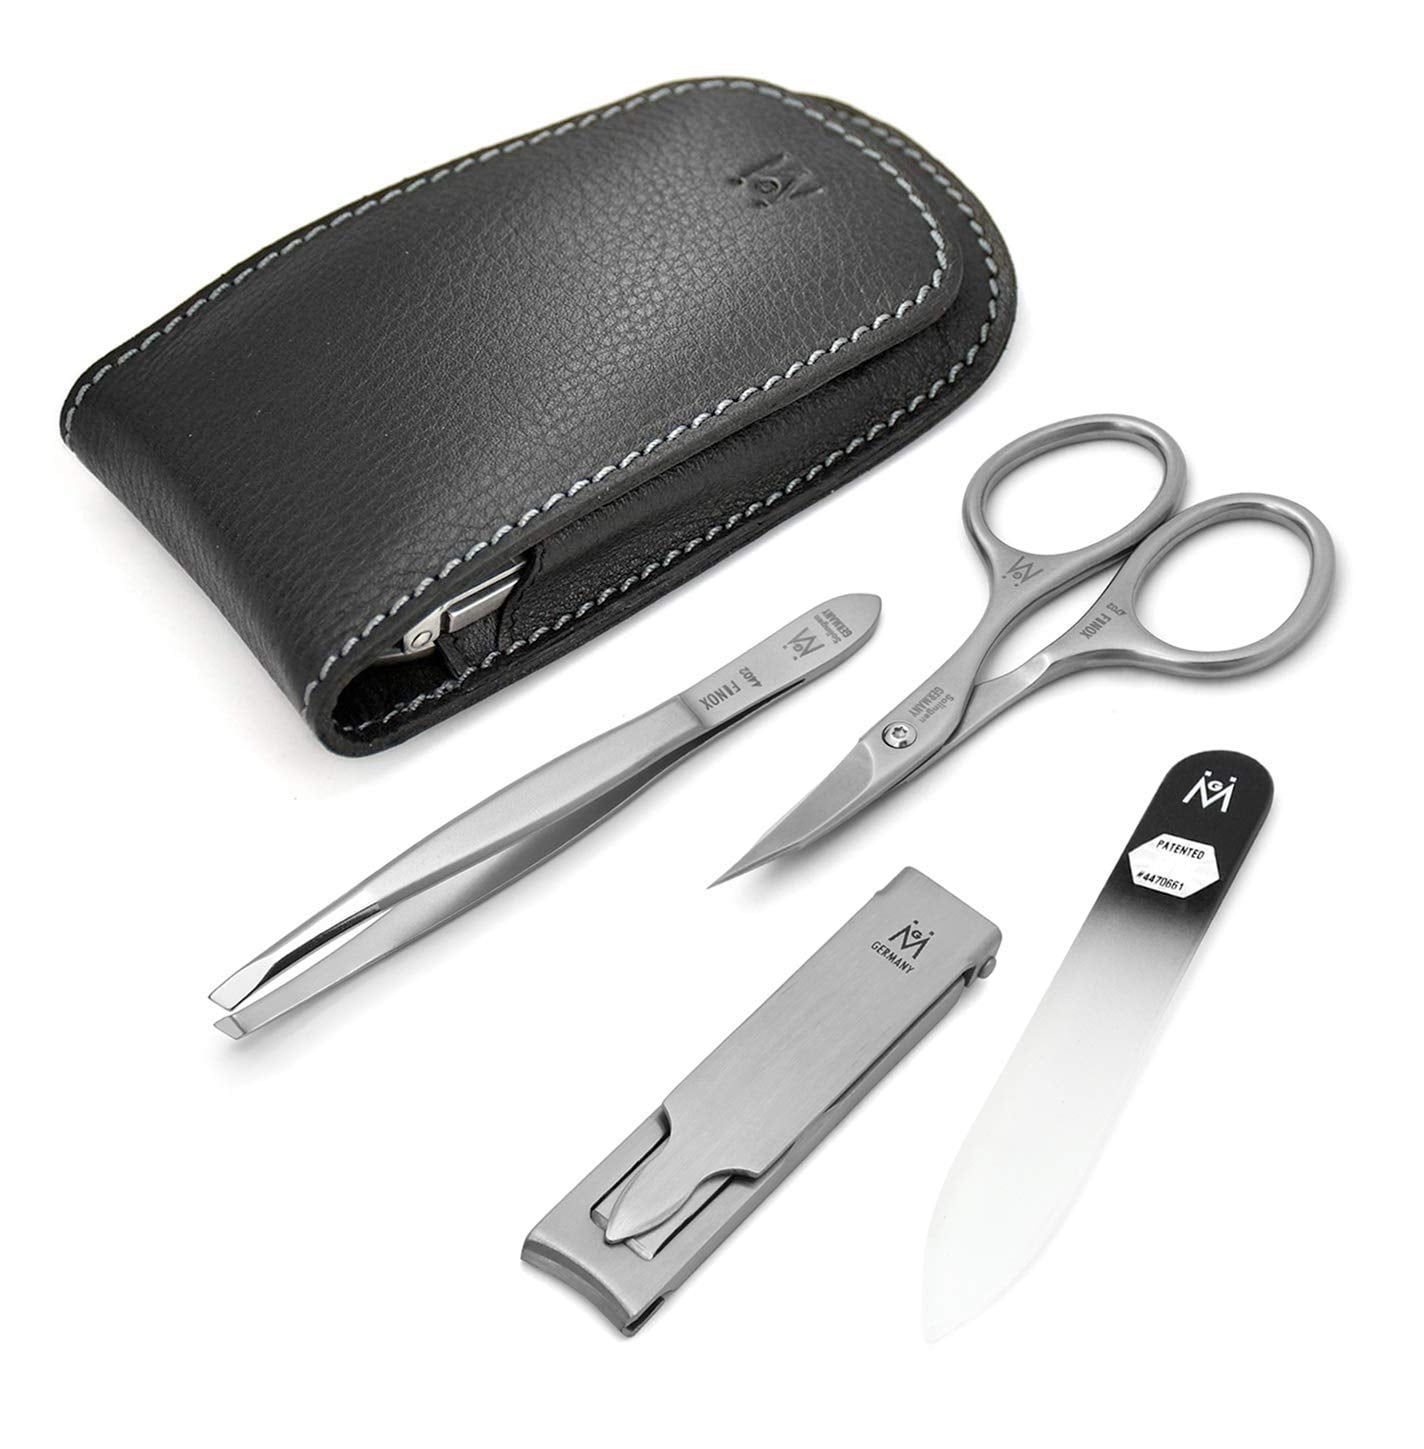 Germanikure Nail Clippers Set in Brown Leather Case – Ethically Made in Solingen Germany, Finox Stainless Steel Tools – Professional Quality Manicure